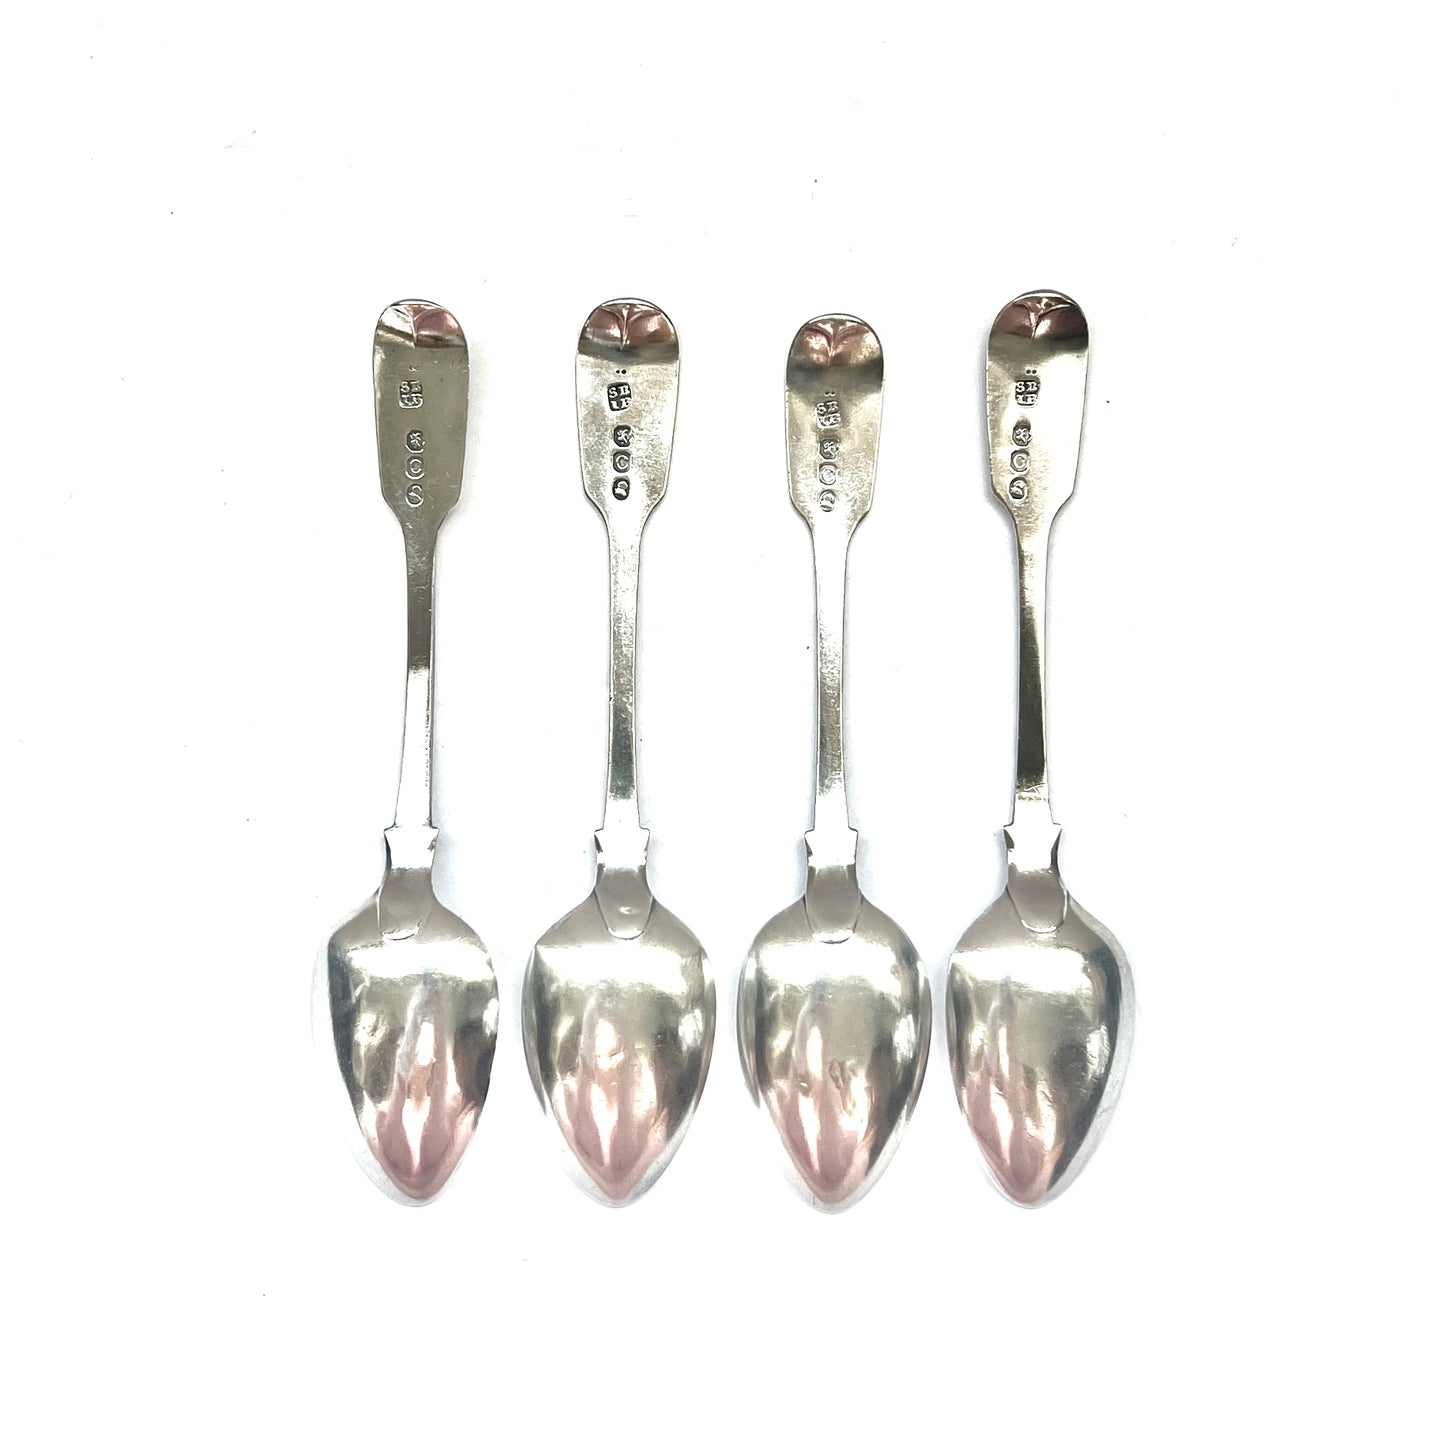 4 George III sterling silver spoons with marks for Sarah & John William Blake, London, 1818